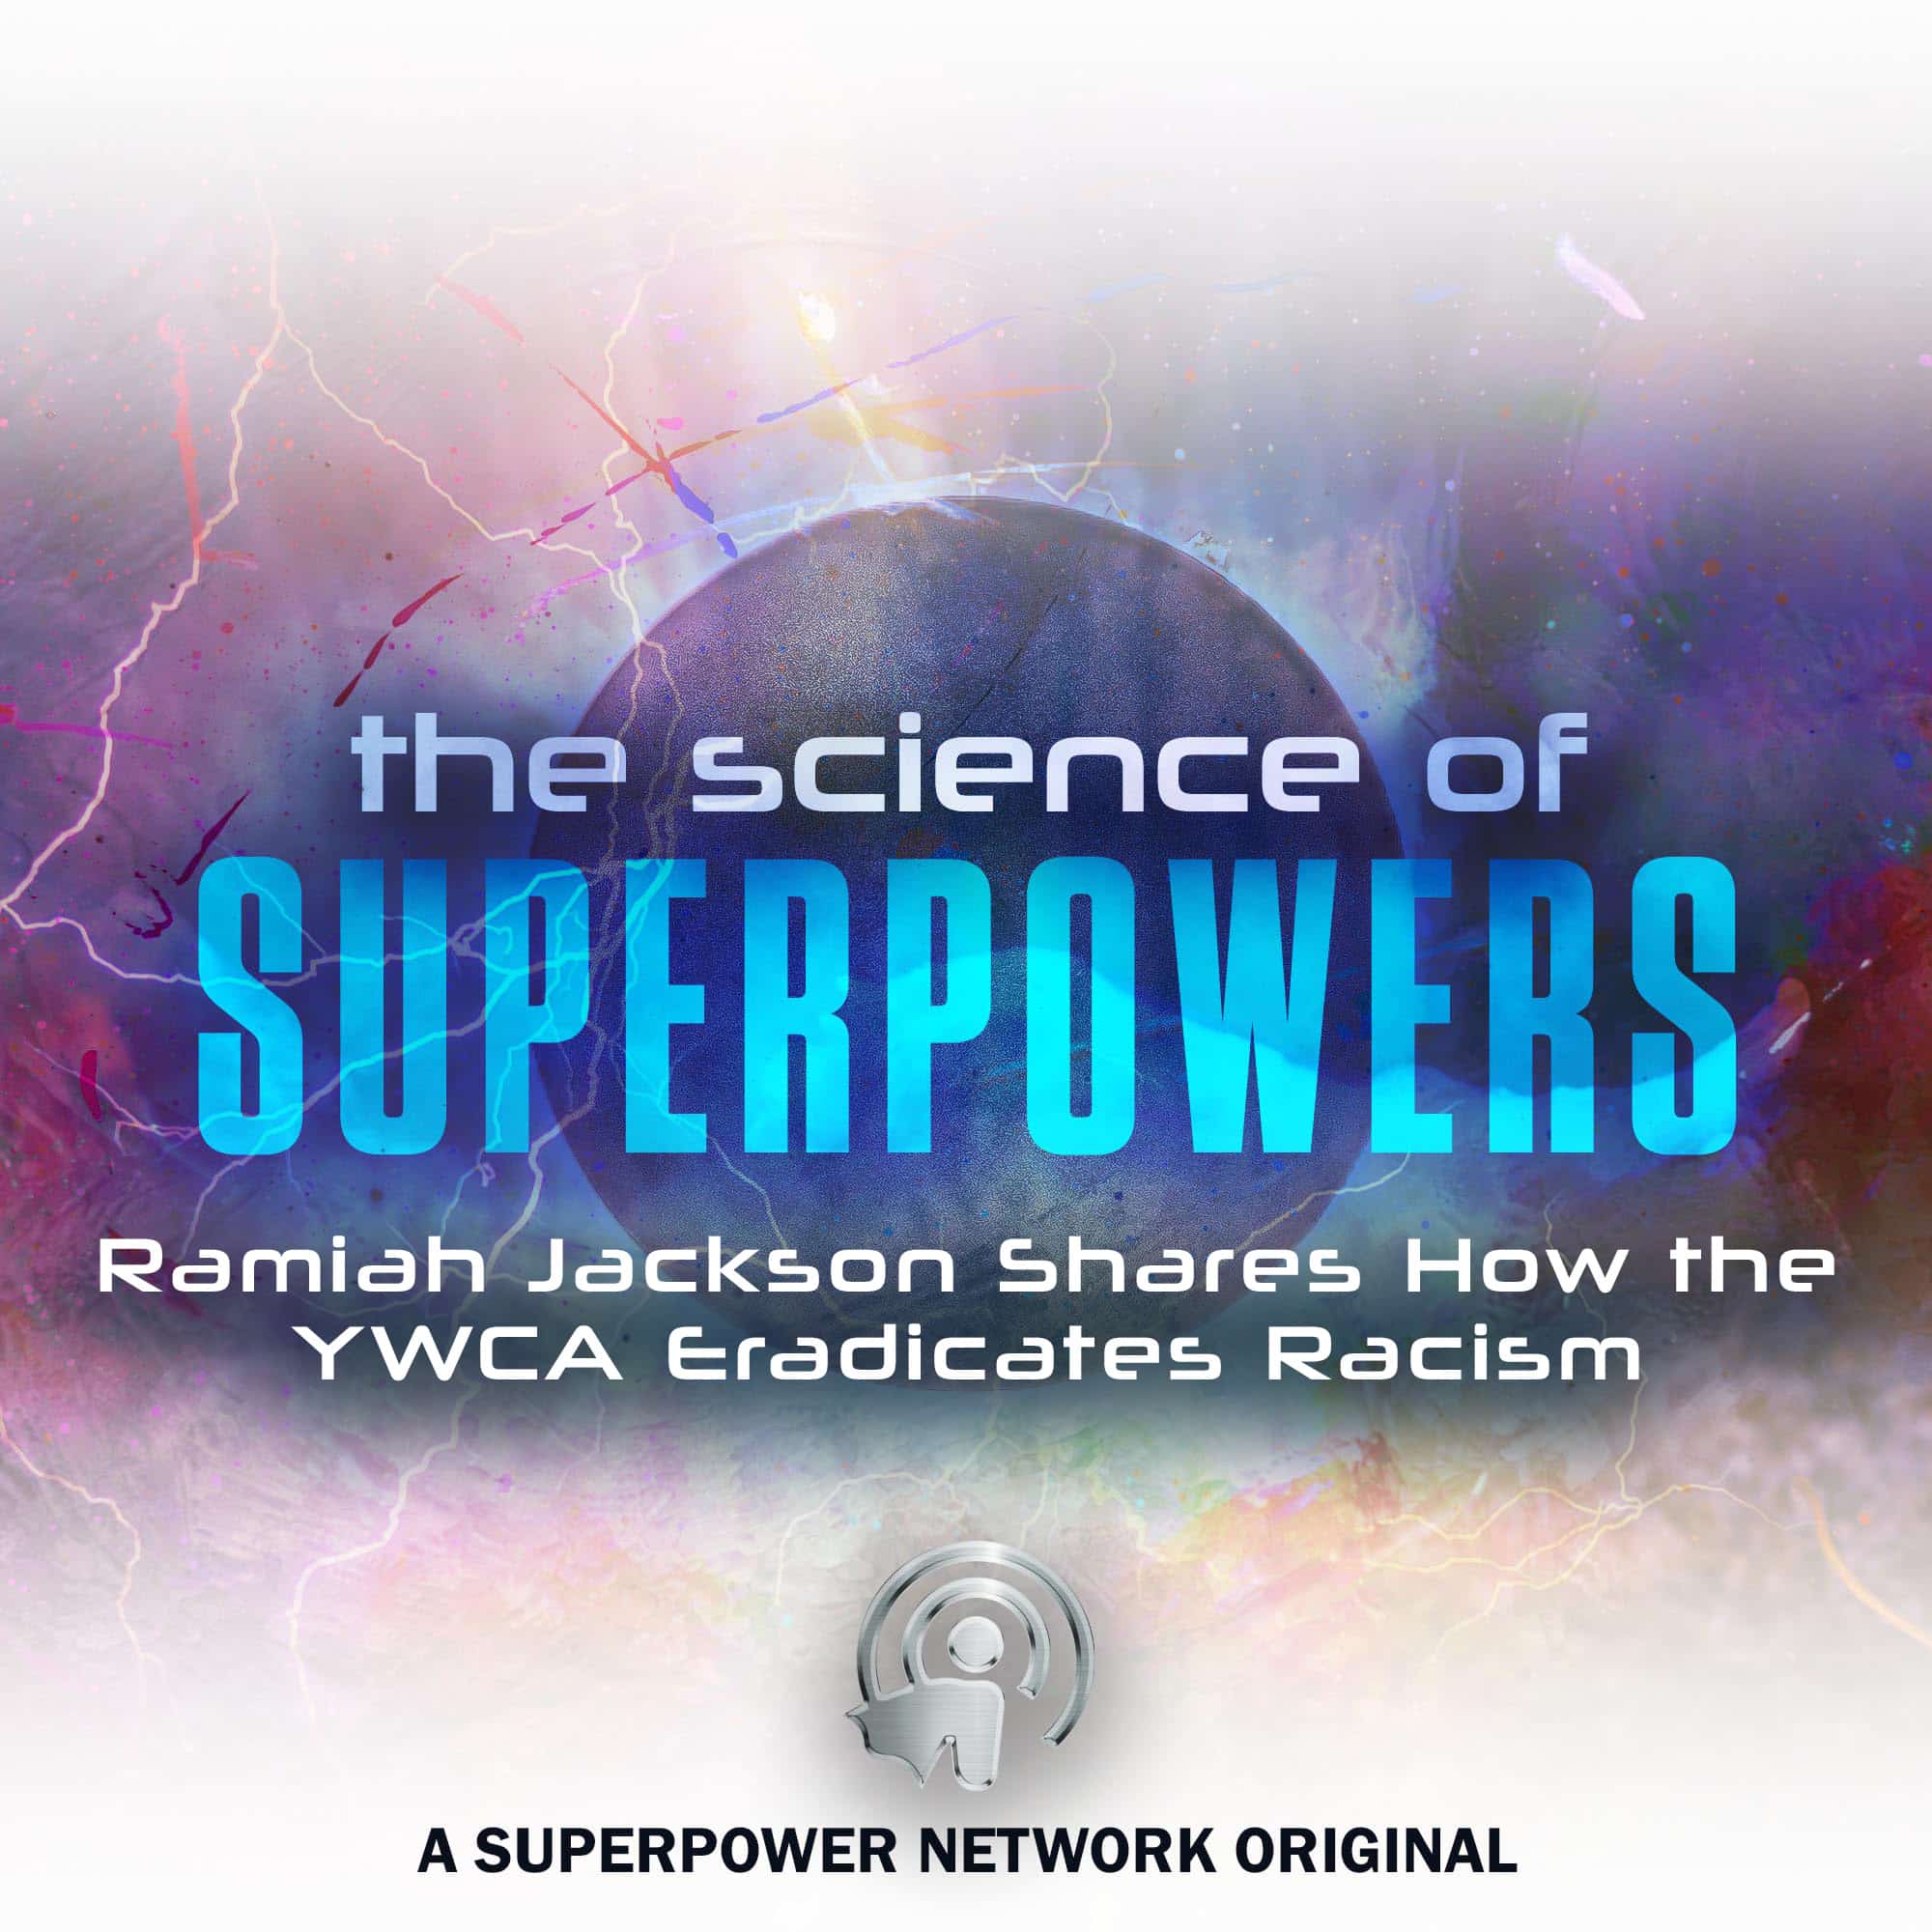 The Science of Superpowers, SOS. Ramiah Jackson Shares How the YWCA Eradicates Racism #SOS #Racism #MasterYourPersonalPower #superpowers #Superpowerexperts #SuperPowerNetwork